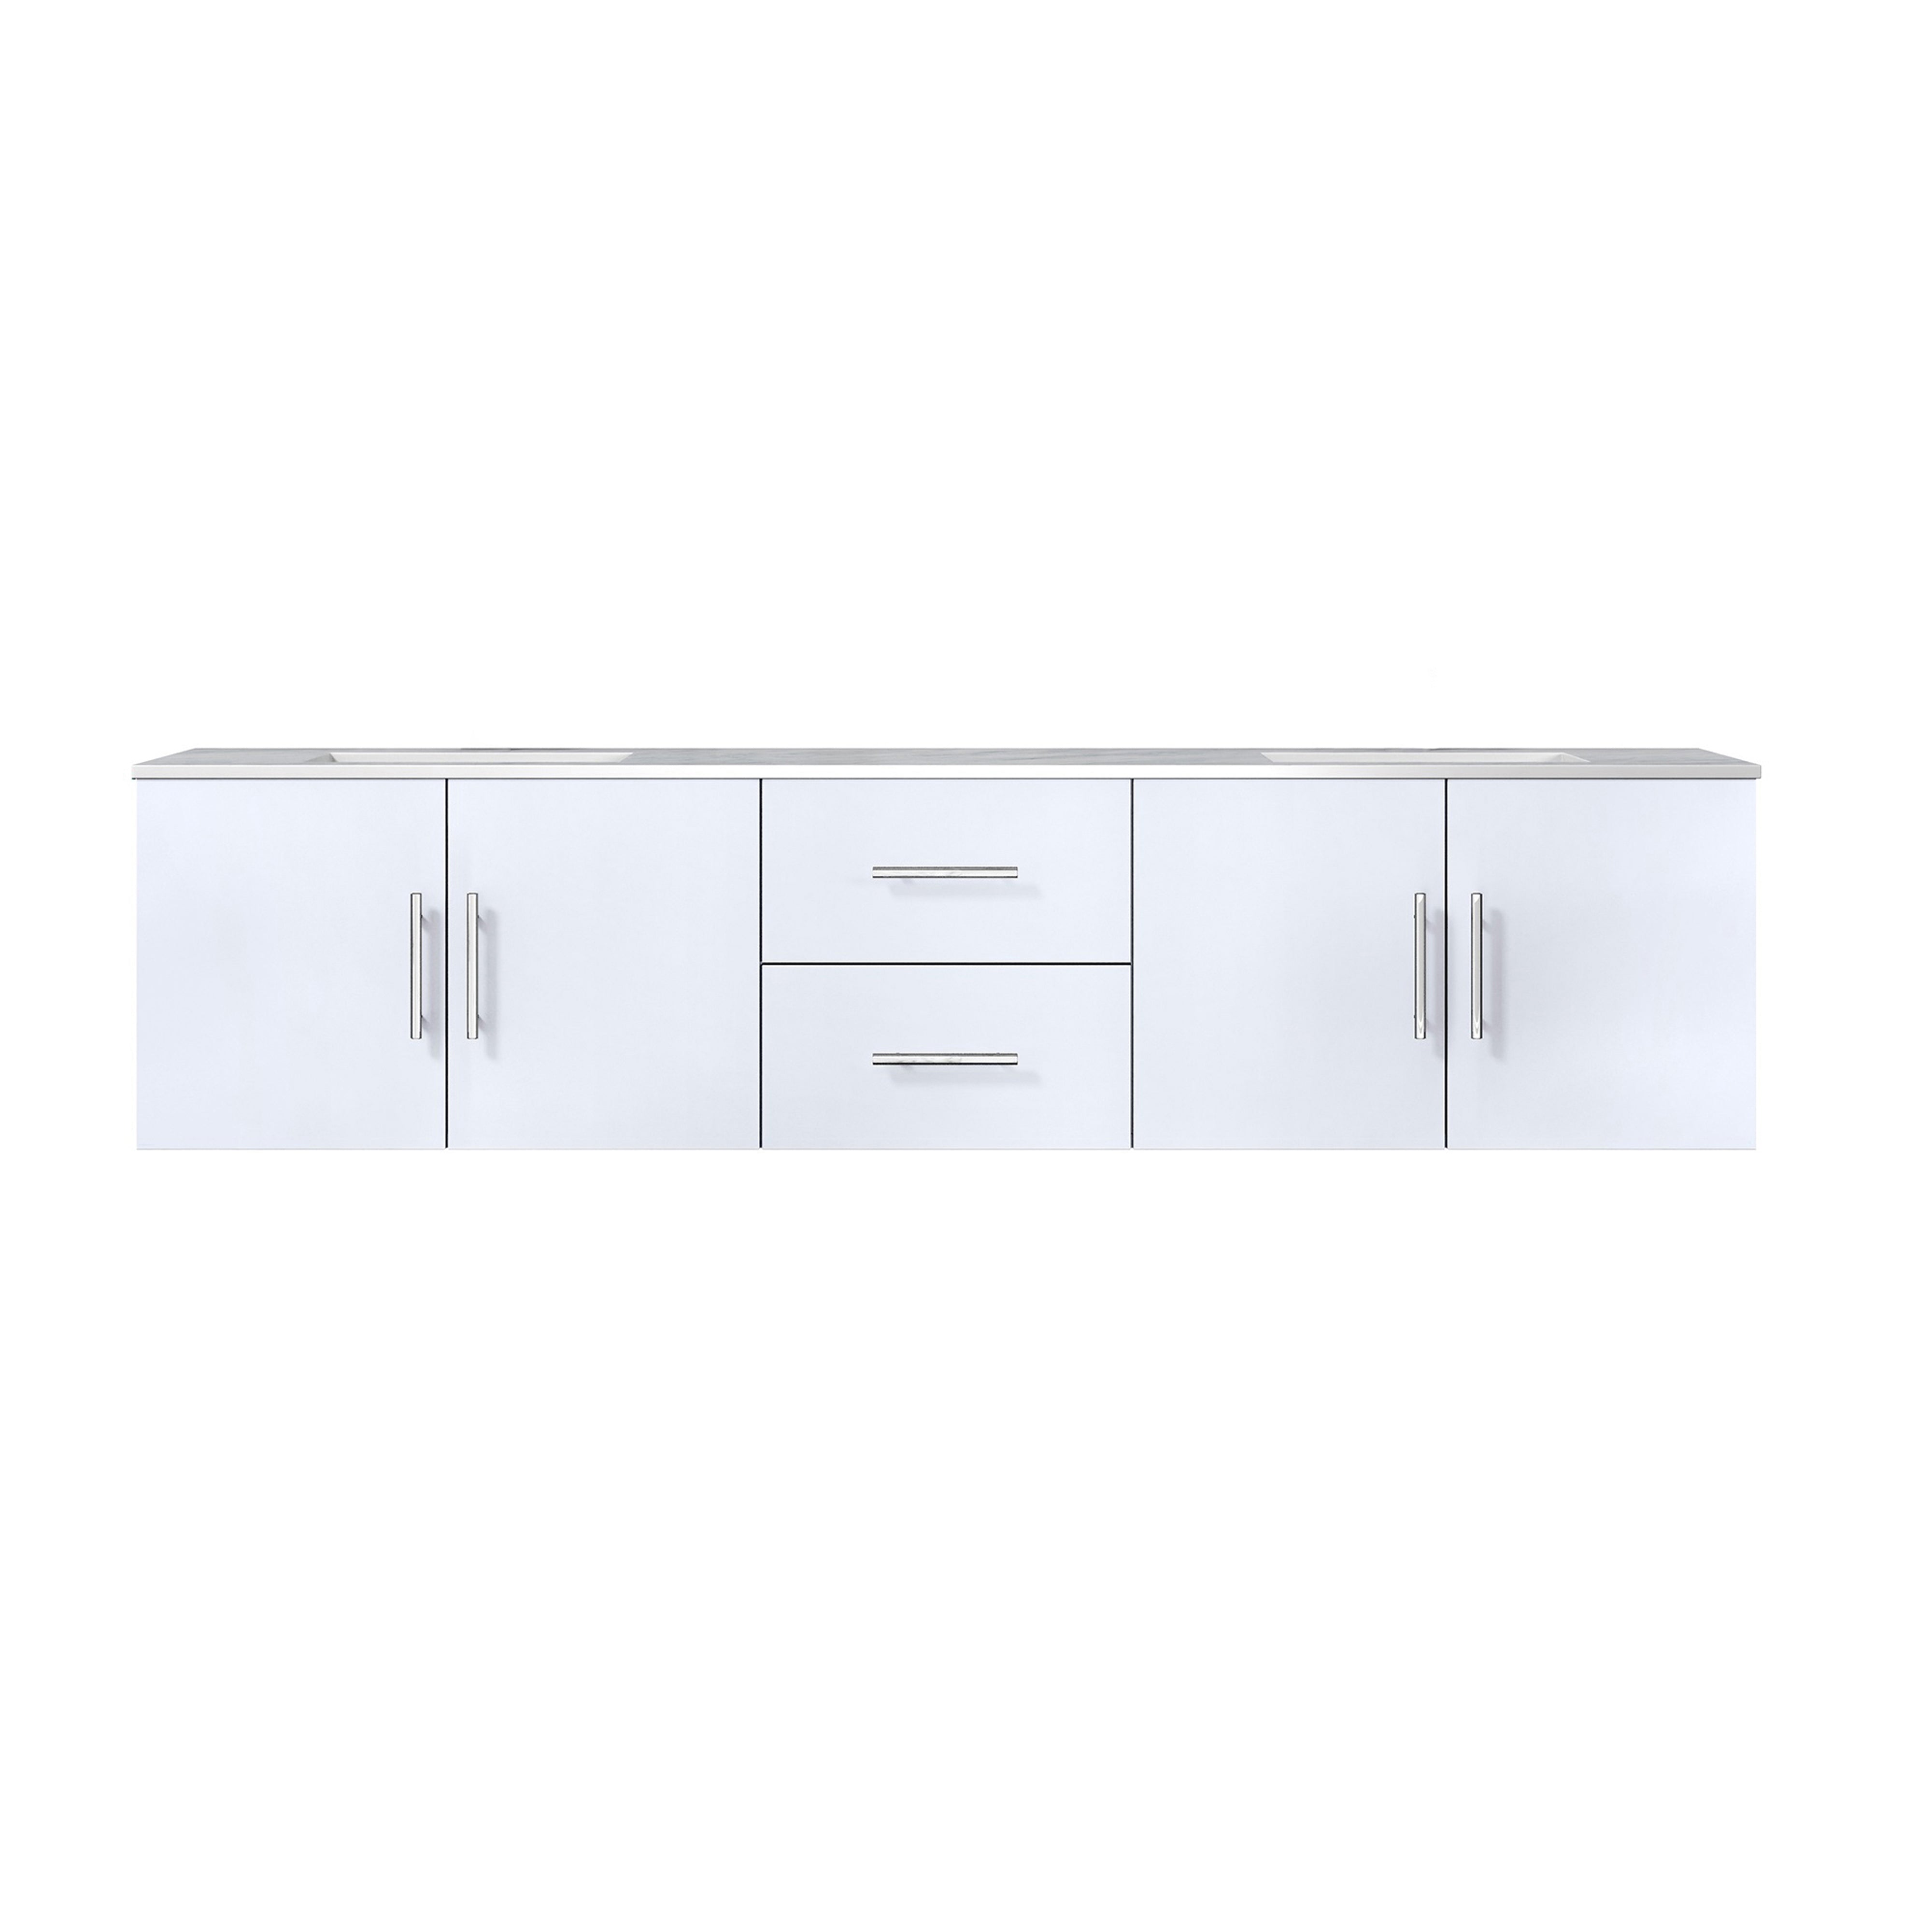 Lexora Geneva LG192280DMDS000 80" Double Wall Mounted Bathroom Vanity in Glossy White with White Carrara Marble, White Rectangle Sinks, Front View